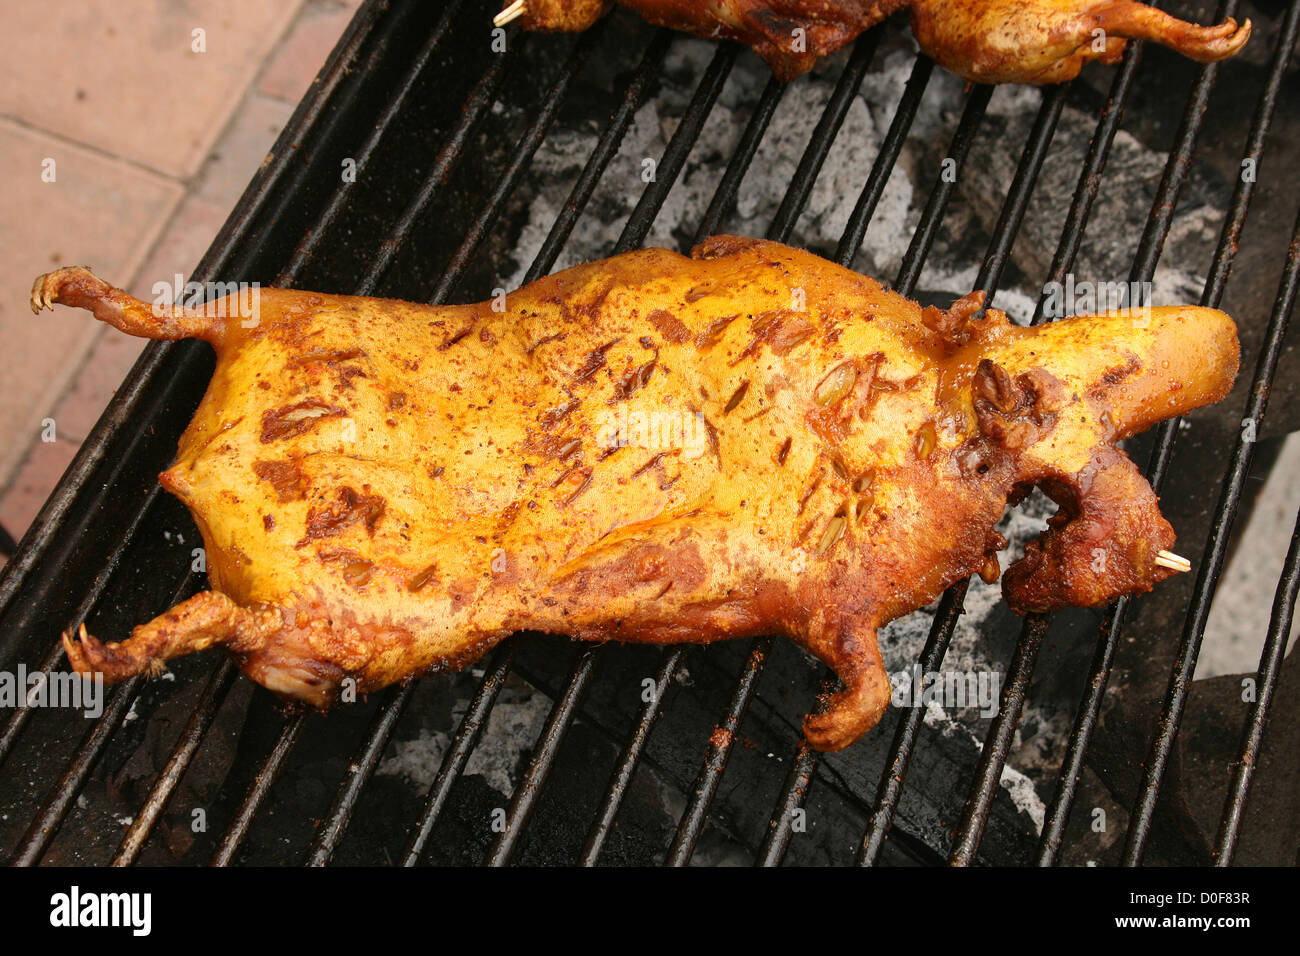 Roasted Cuy, or Guinea Pig, is a local delicacy in the province of Imbabura, Ecuador. It is spiced and roasted over coals. Stock Photo